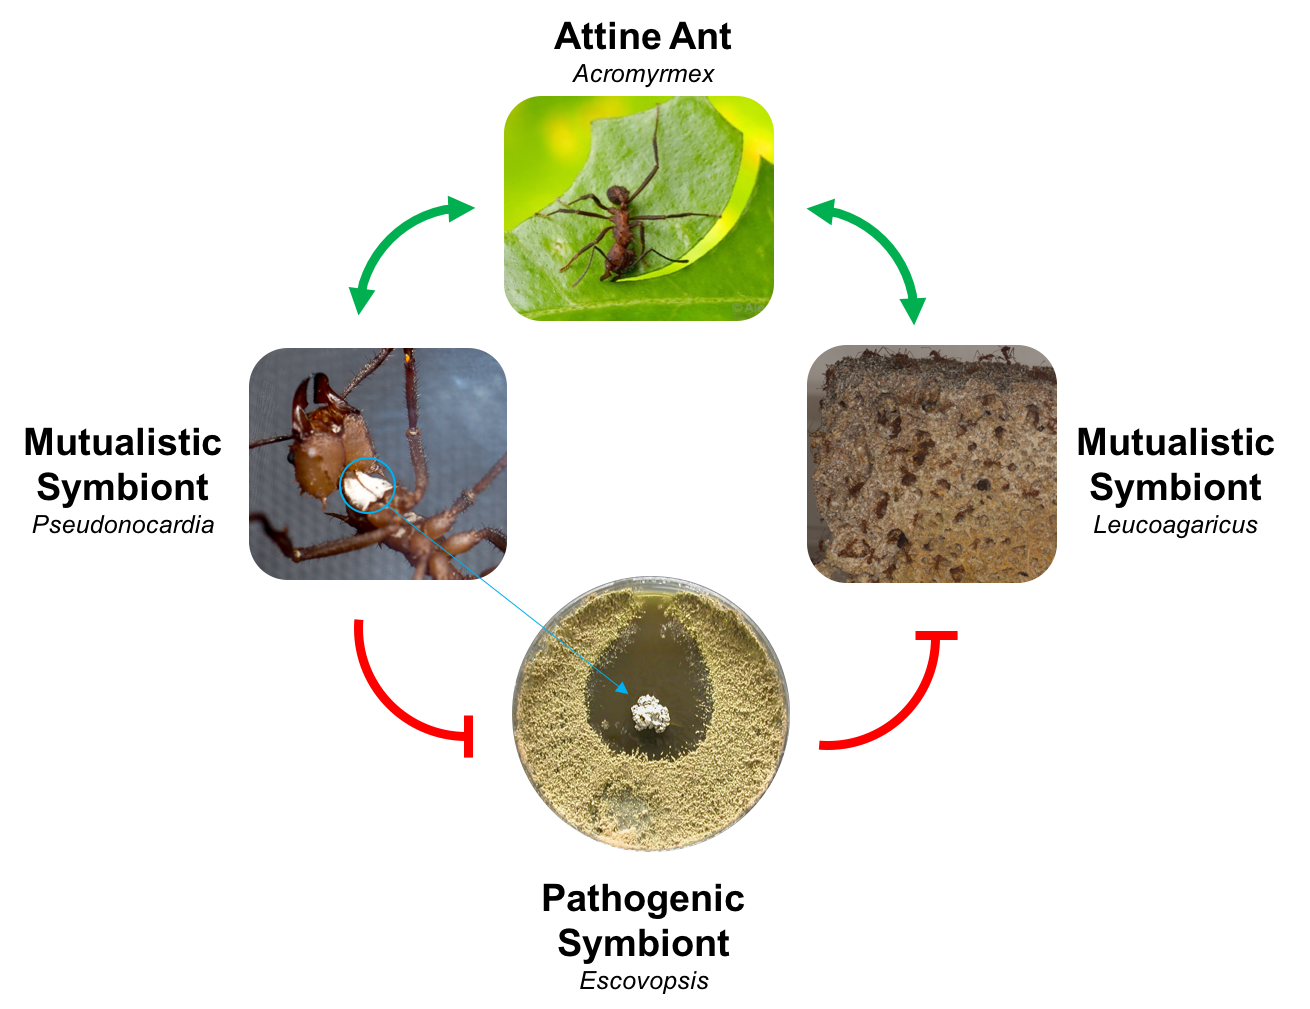 The Ant-Microbe Symbiosis